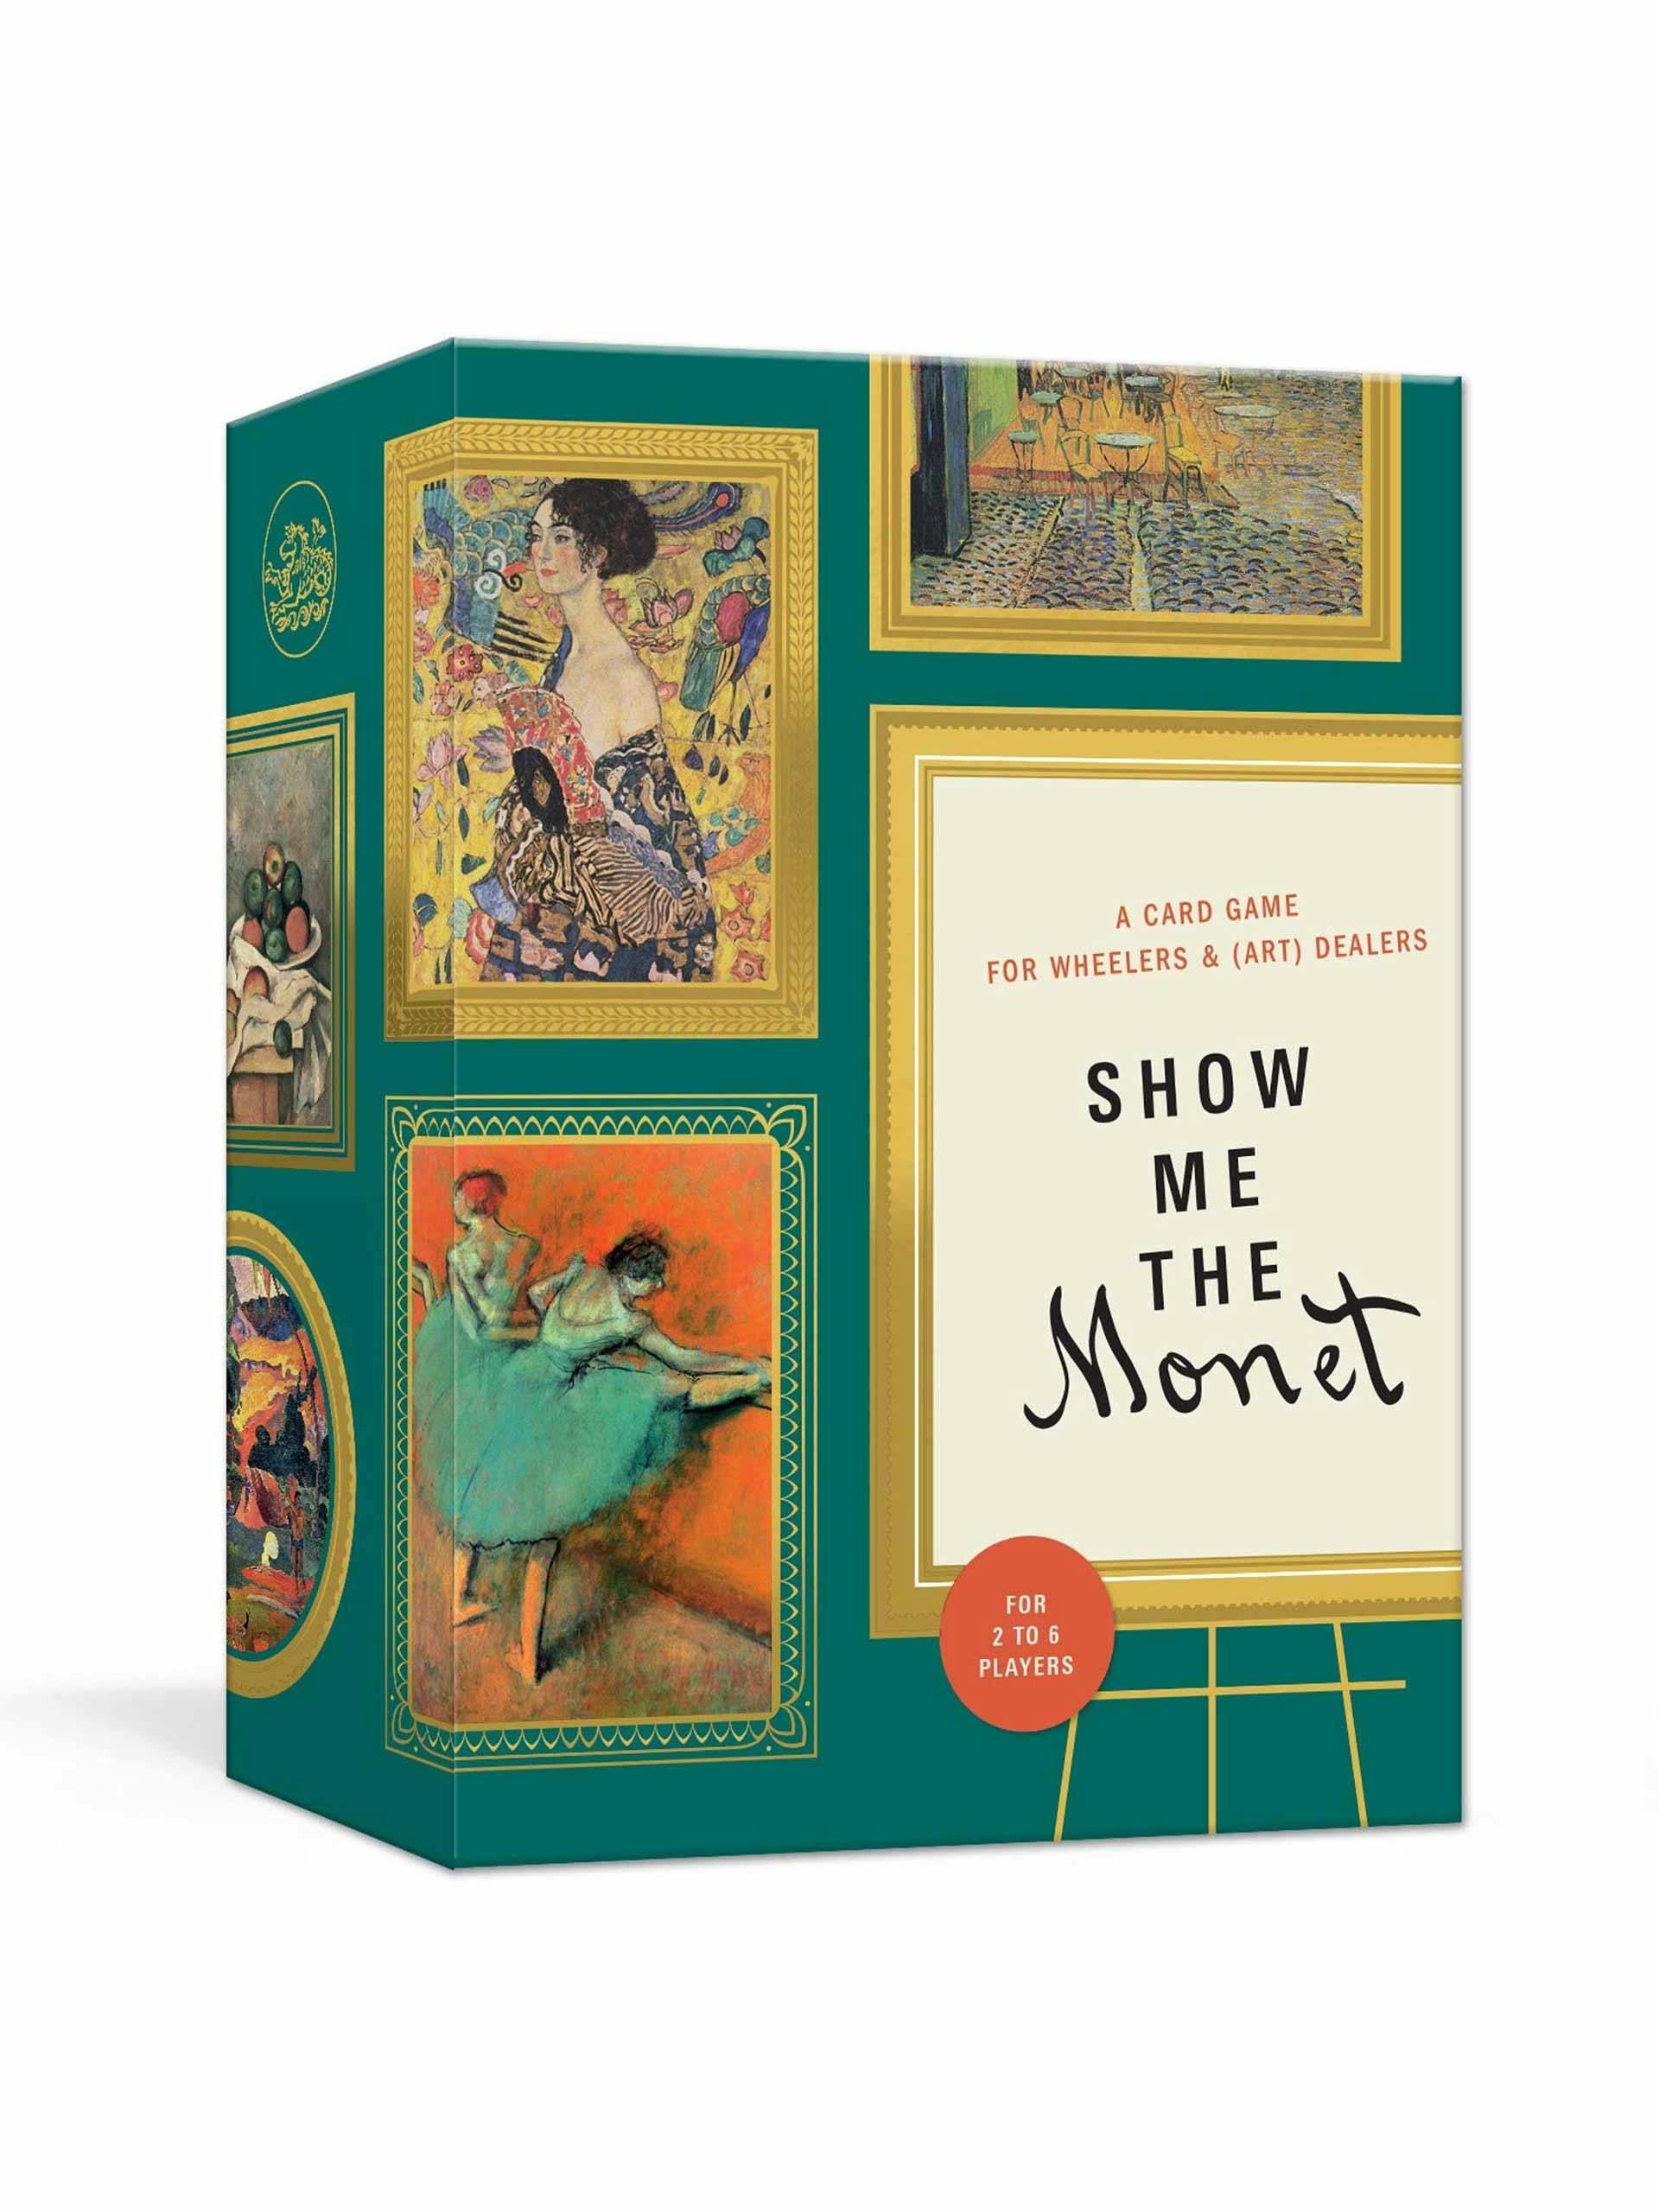 Show Me The Monet card game